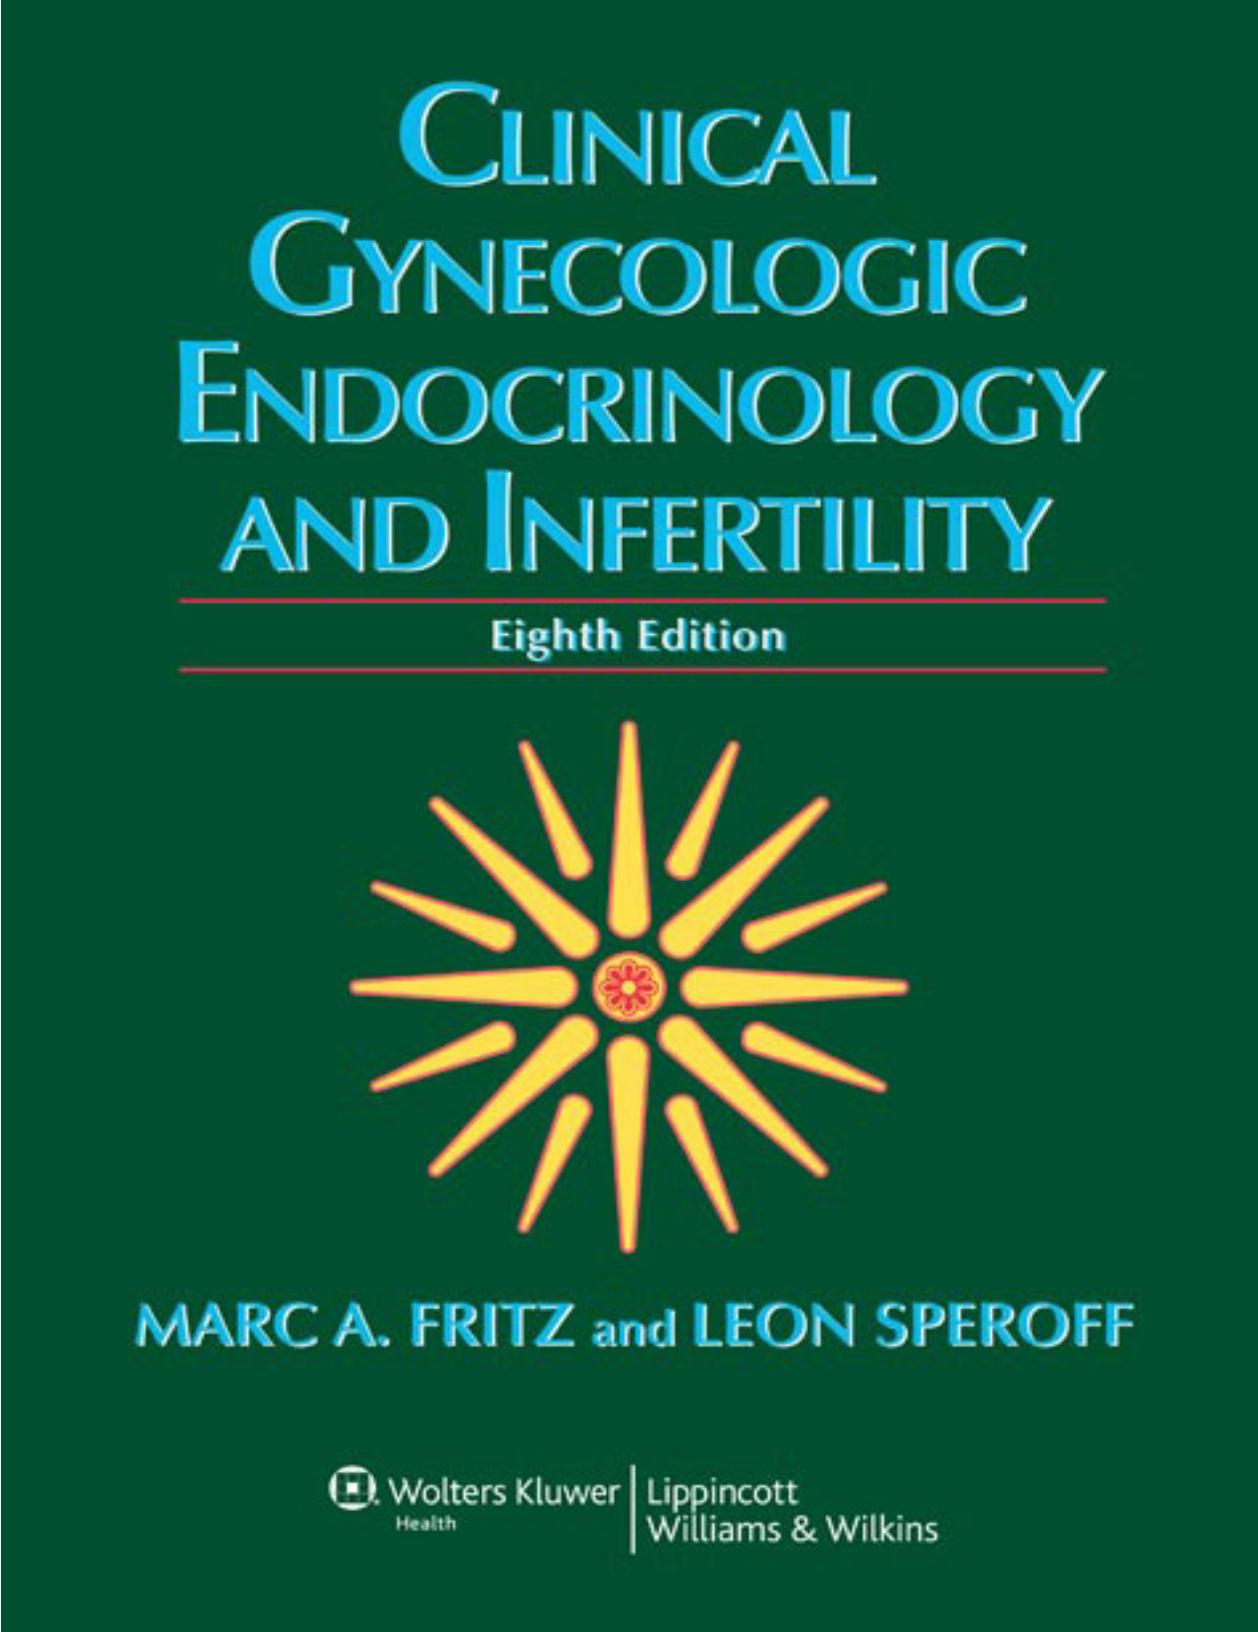 CLINICAL GYNECOLOGIC ENDOCRINOLOGY AND INFERTILITY, Eighth Edition